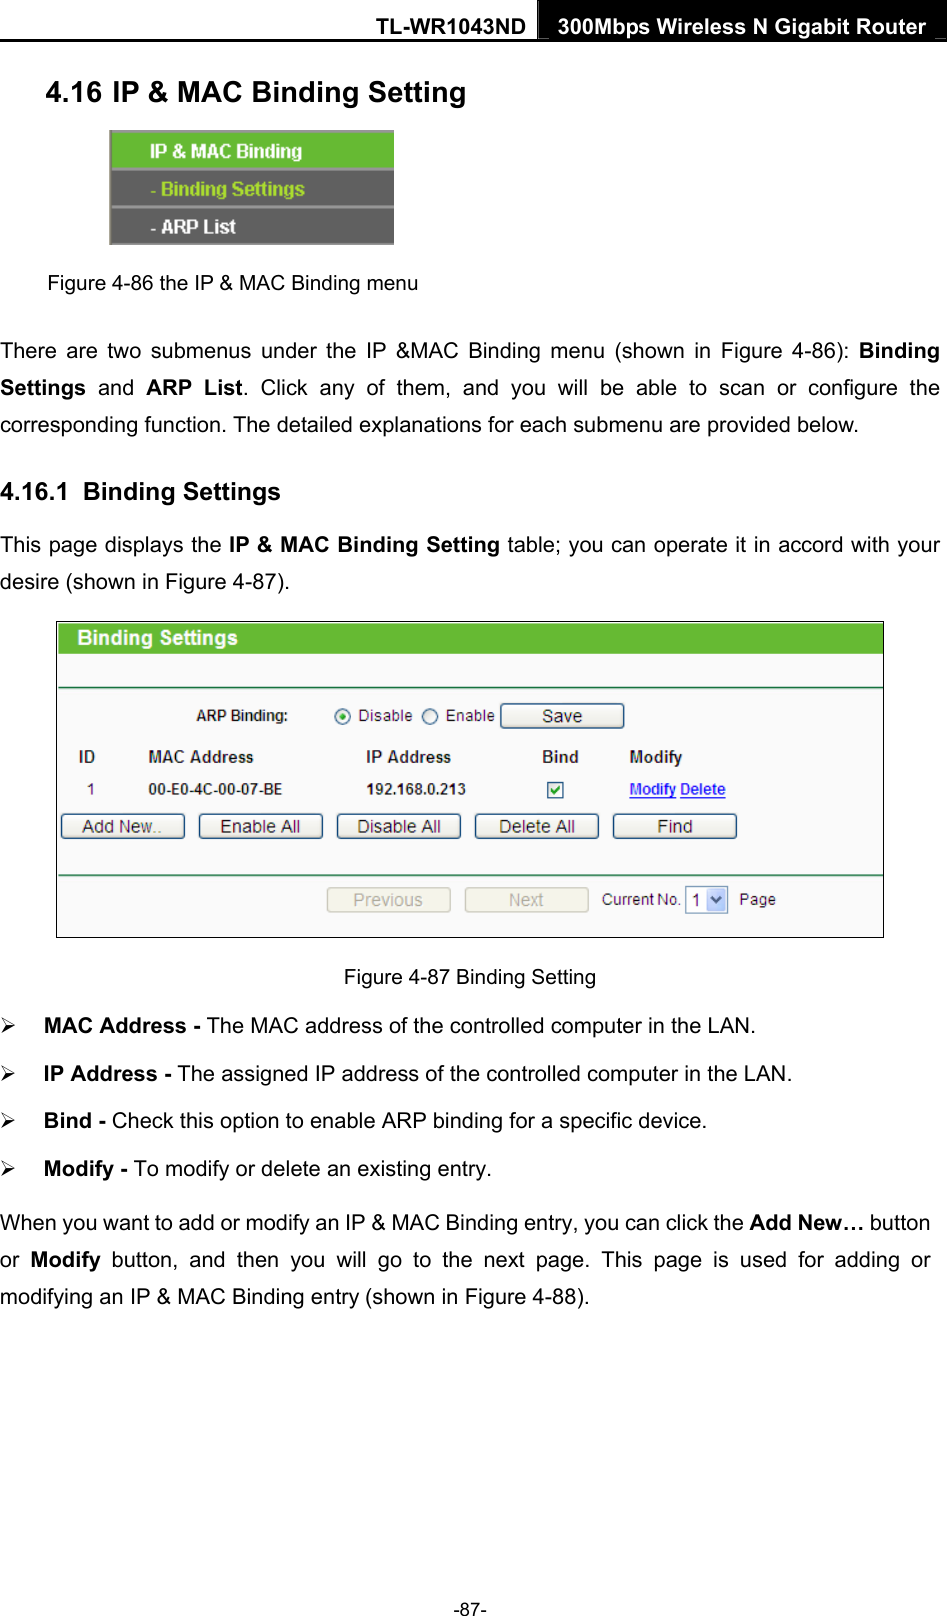 TL-WR1043ND 300Mbps Wireless N Gigabit Router  4.16 IP &amp; MAC Binding Setting  Figure 4-86 the IP &amp; MAC Binding menu There are two submenus under the IP &amp;MAC Binding menu (shown in Figure 4-86):  Binding Settings  and ARP List. Click any of them, and you will be able to scan or configure the corresponding function. The detailed explanations for each submenu are provided below. 4.16.1  Binding Settings This page displays the IP &amp; MAC Binding Setting table; you can operate it in accord with your desire (shown in Figure 4-87).   Figure 4-87 Binding Setting ¾ MAC Address - The MAC address of the controlled computer in the LAN.   ¾ IP Address - The assigned IP address of the controlled computer in the LAN.   ¾ Bind - Check this option to enable ARP binding for a specific device.   ¾ Modify - To modify or delete an existing entry.   When you want to add or modify an IP &amp; MAC Binding entry, you can click the Add New… button or  Modify button, and then you will go to the next page. This page is used for adding or modifying an IP &amp; MAC Binding entry (shown in Figure 4-88).   -87- 